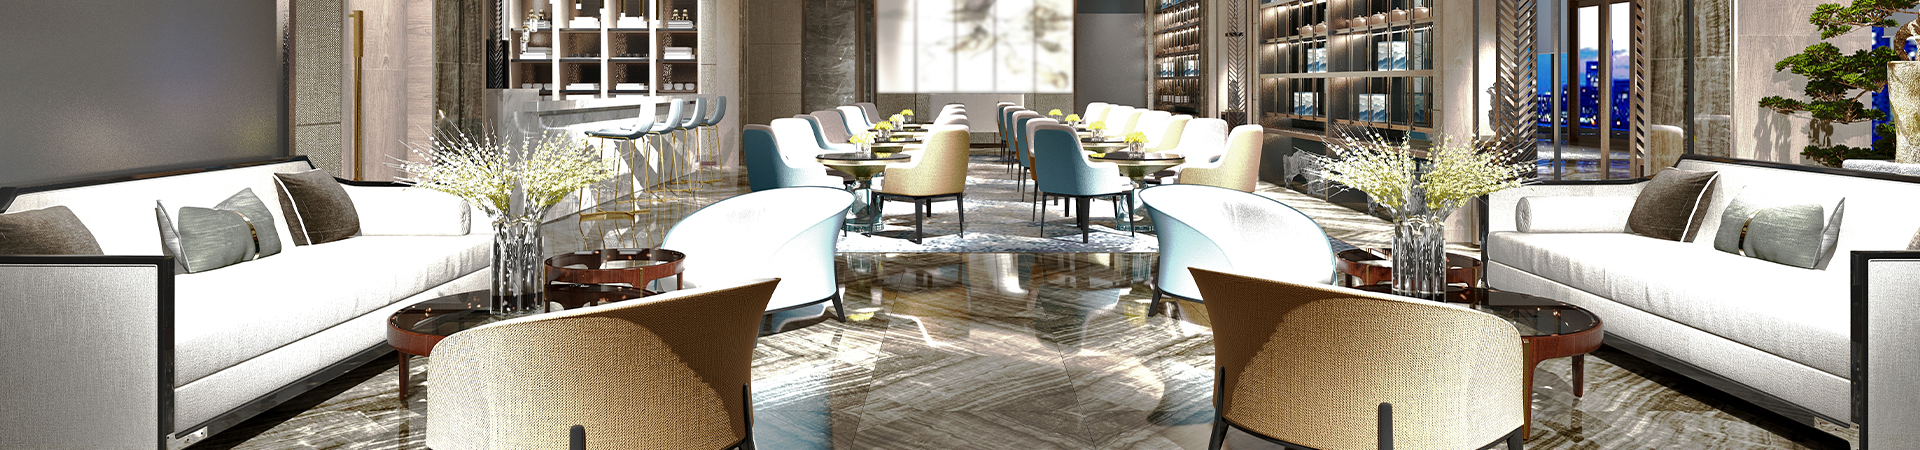 Luxury and Lifestyle Hotel Collection Hotel Dining Room